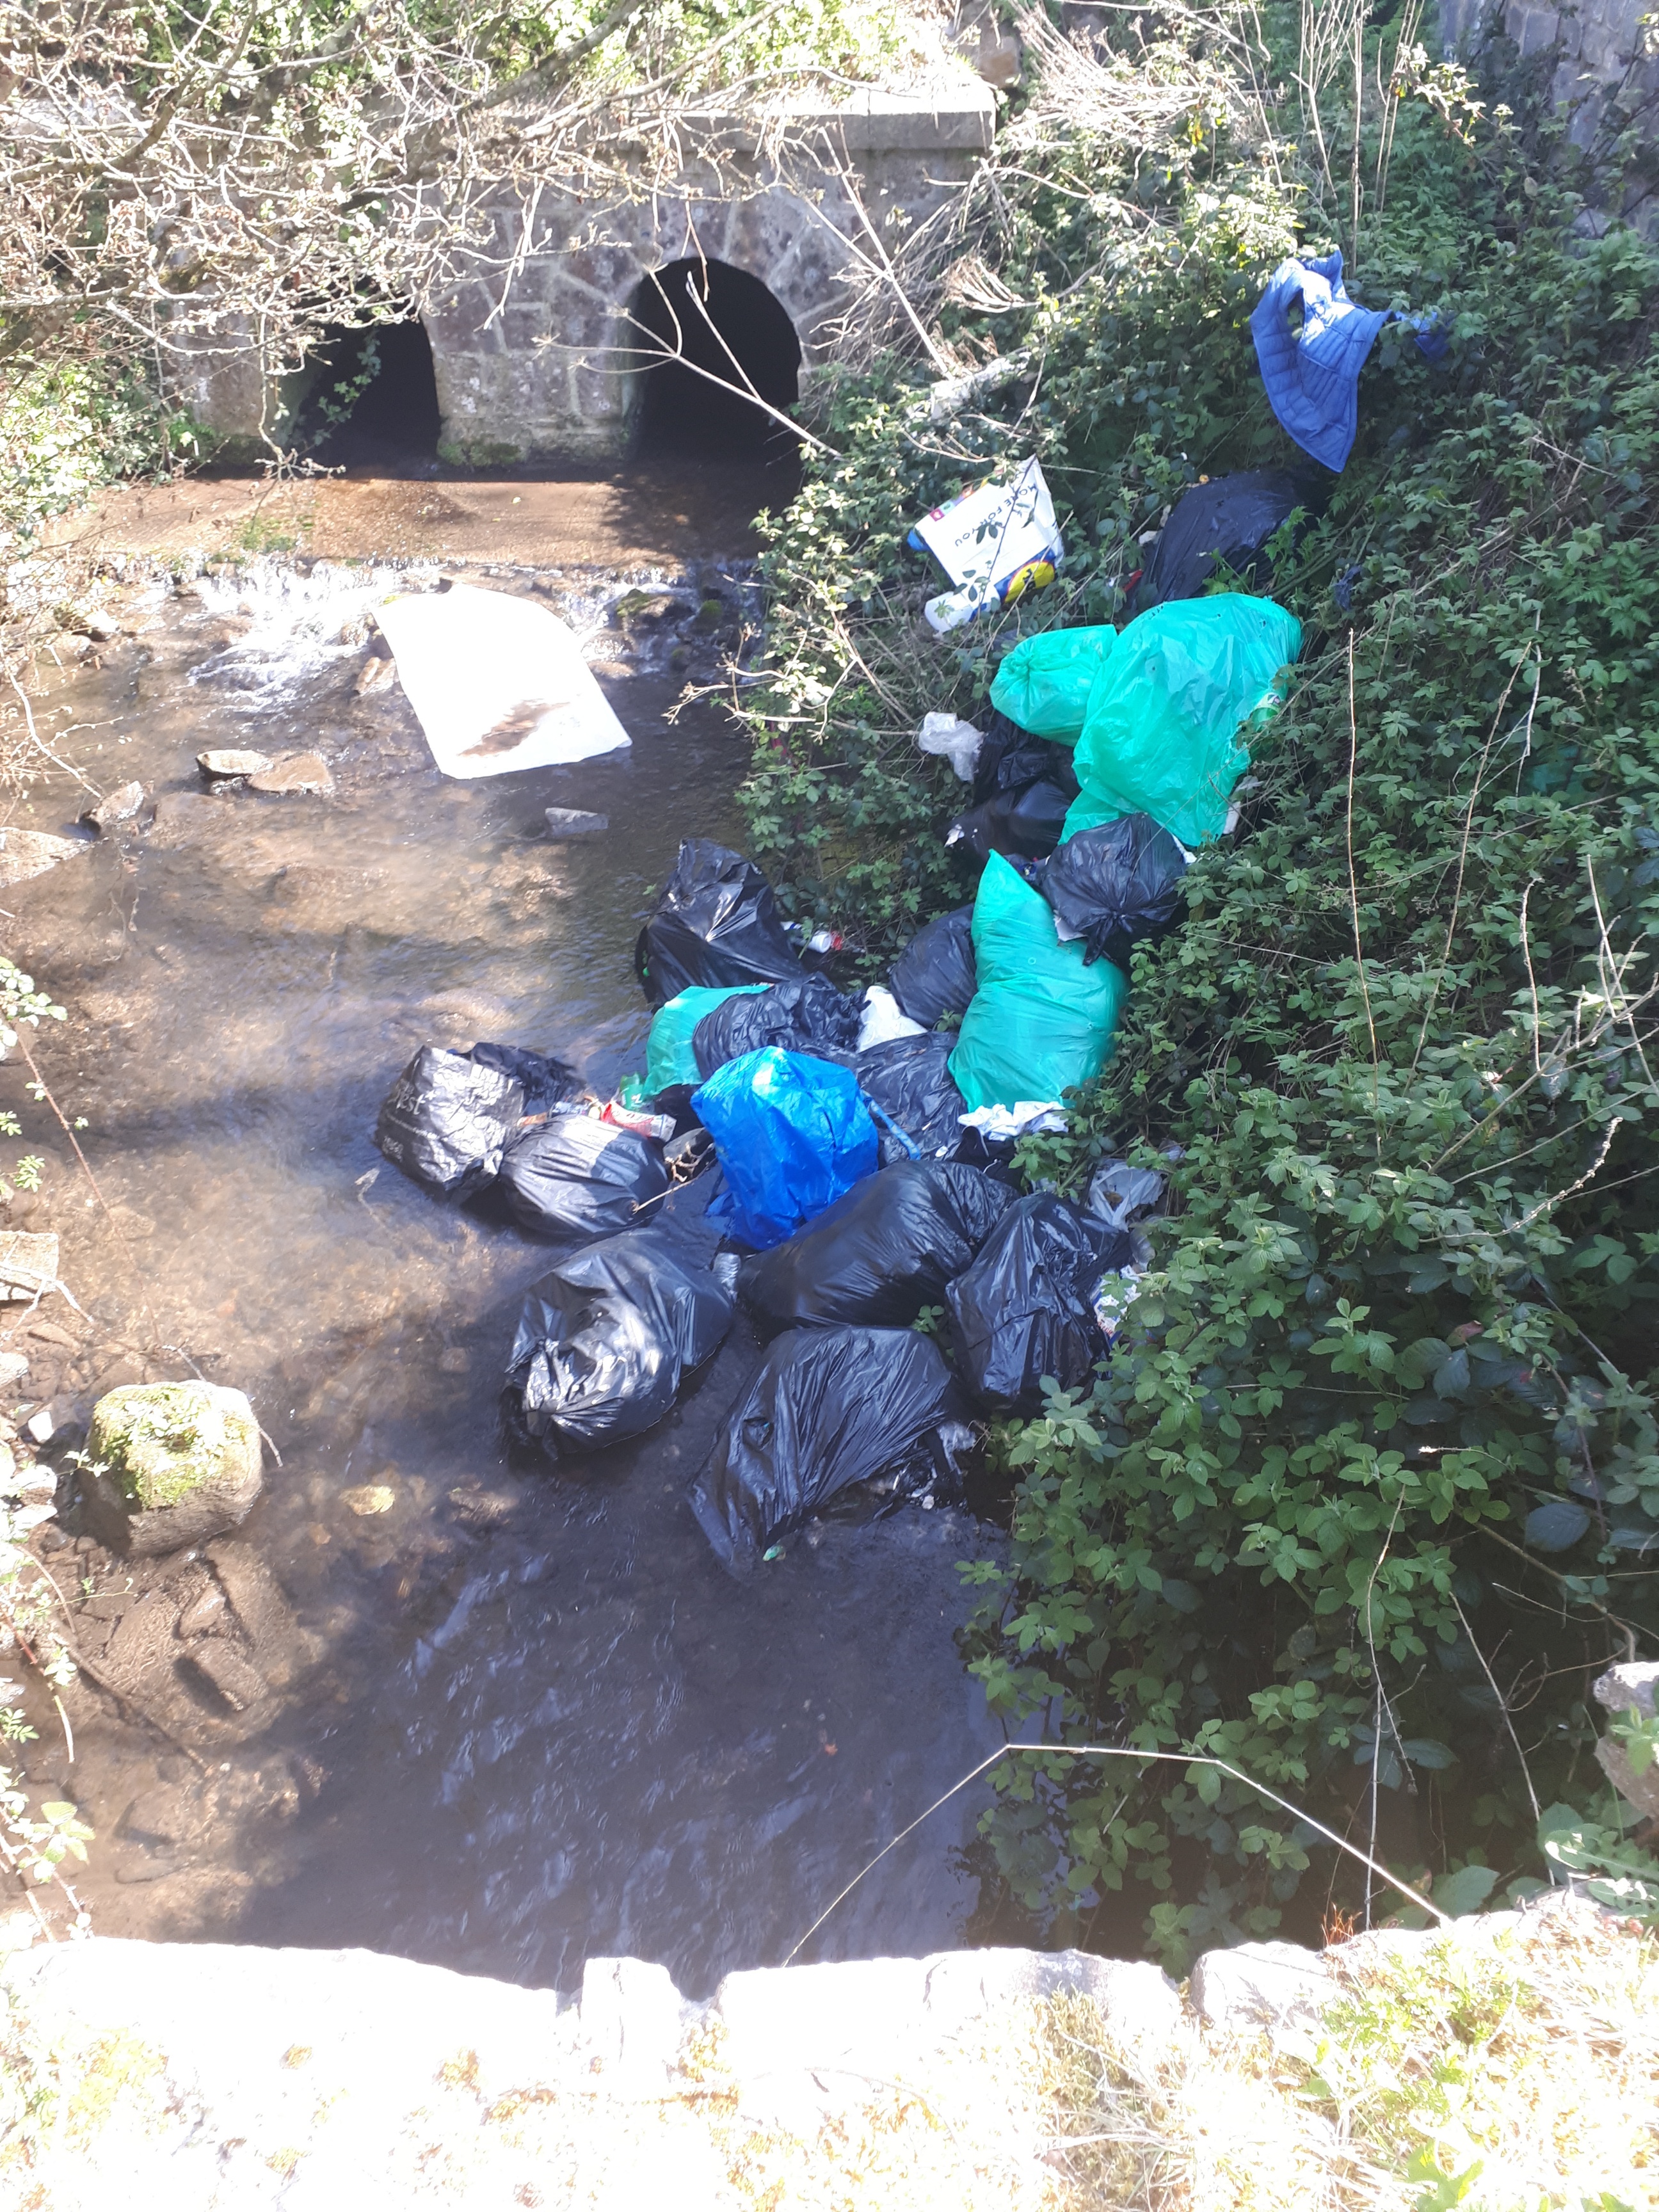 Those found Guilty of Illegal Dumping will be Prosecuted says Ireland’s Local Authorities